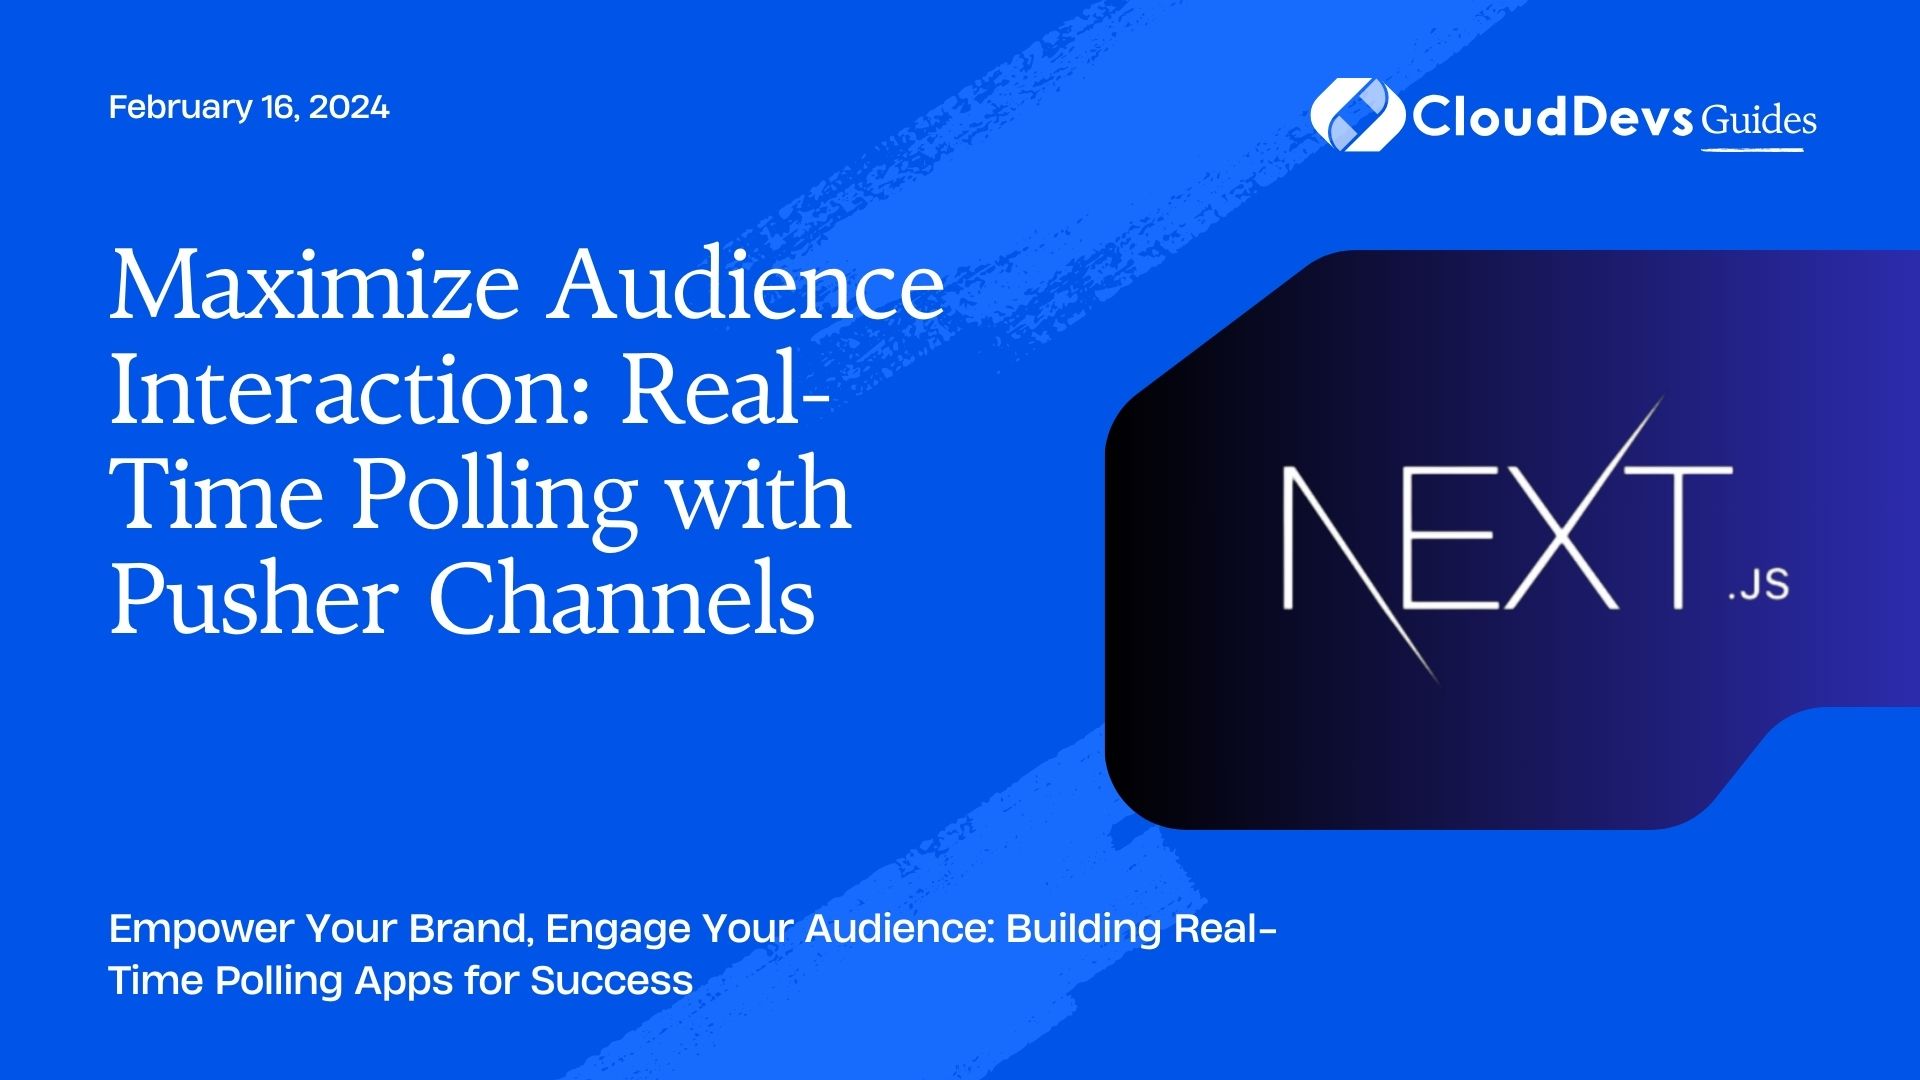 Maximize Audience Interaction: Real-Time Polling with Pusher Channels